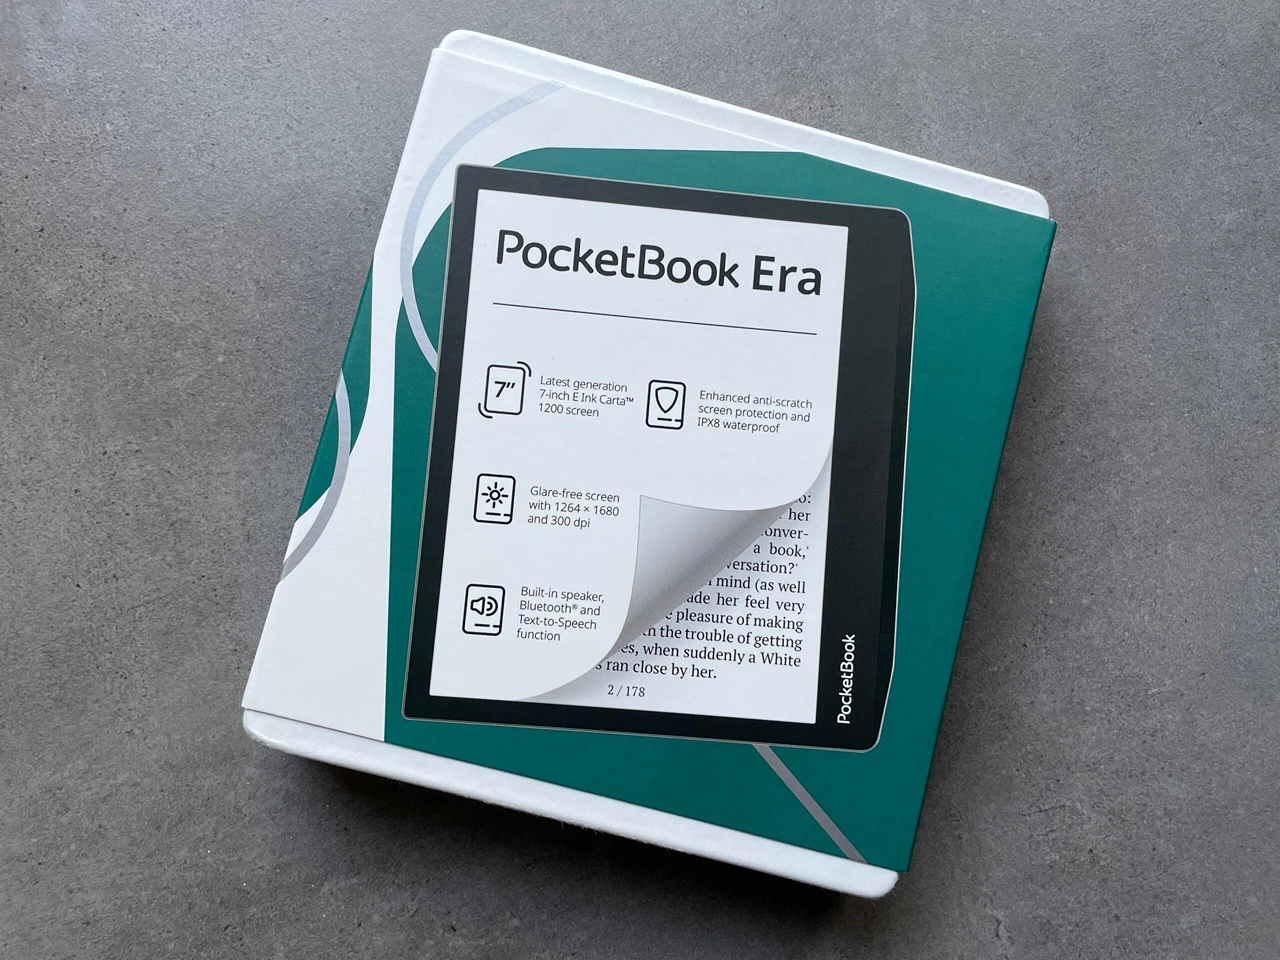 PocketBook Era review – For those who read and listen